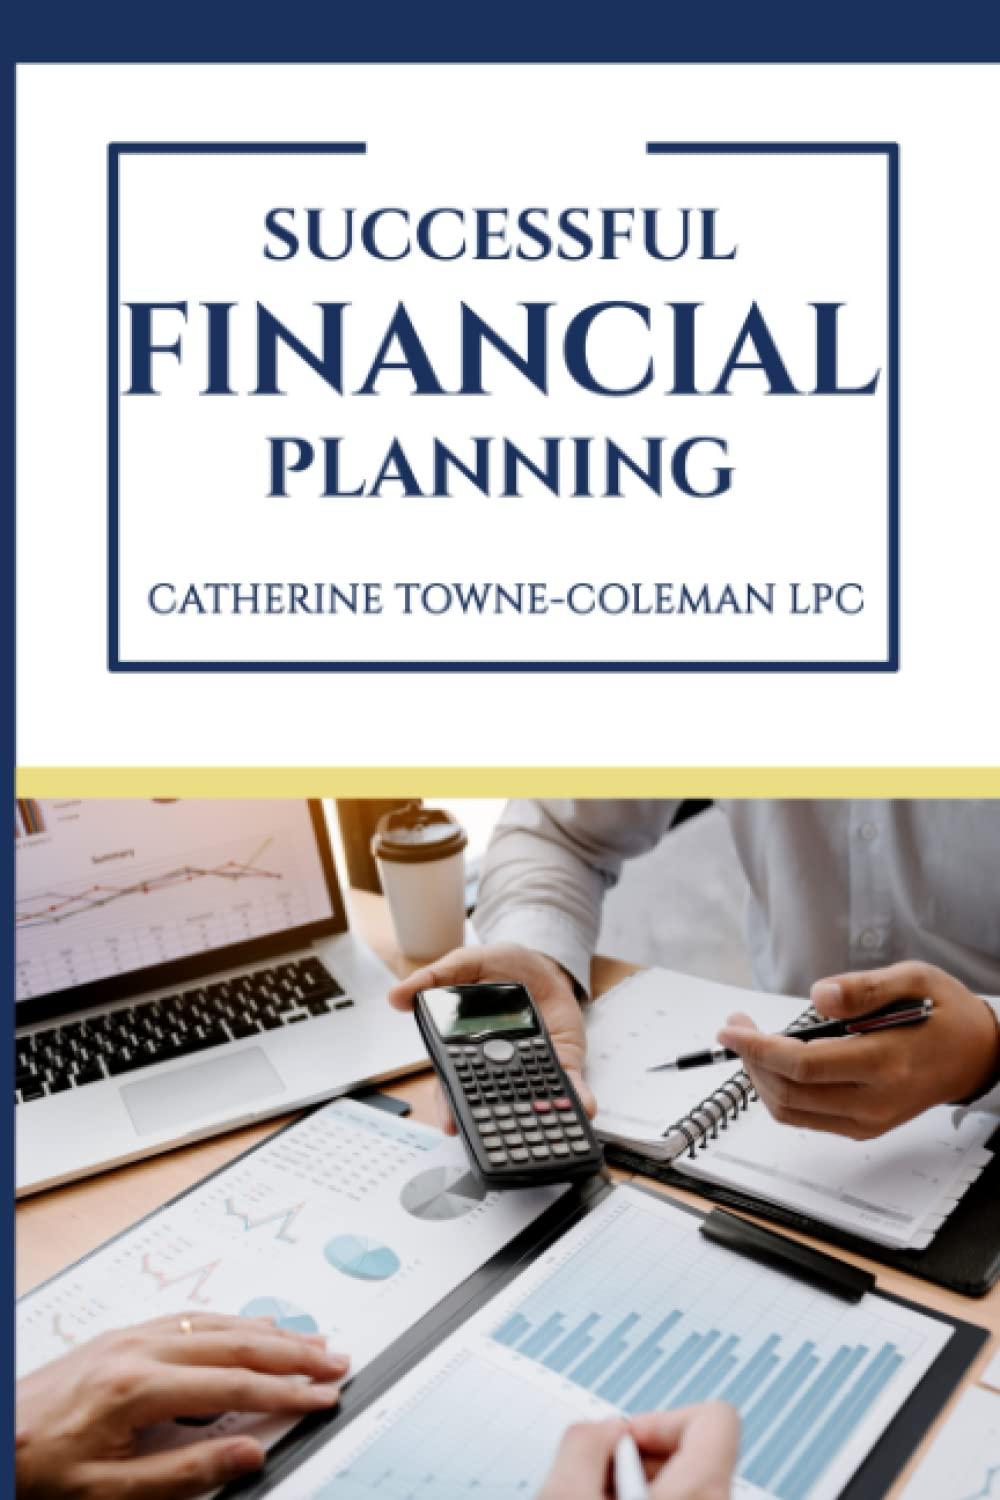 successful financial planning 1st edition catherine towne coleman b0b5kqkw6q, 979-8839832688